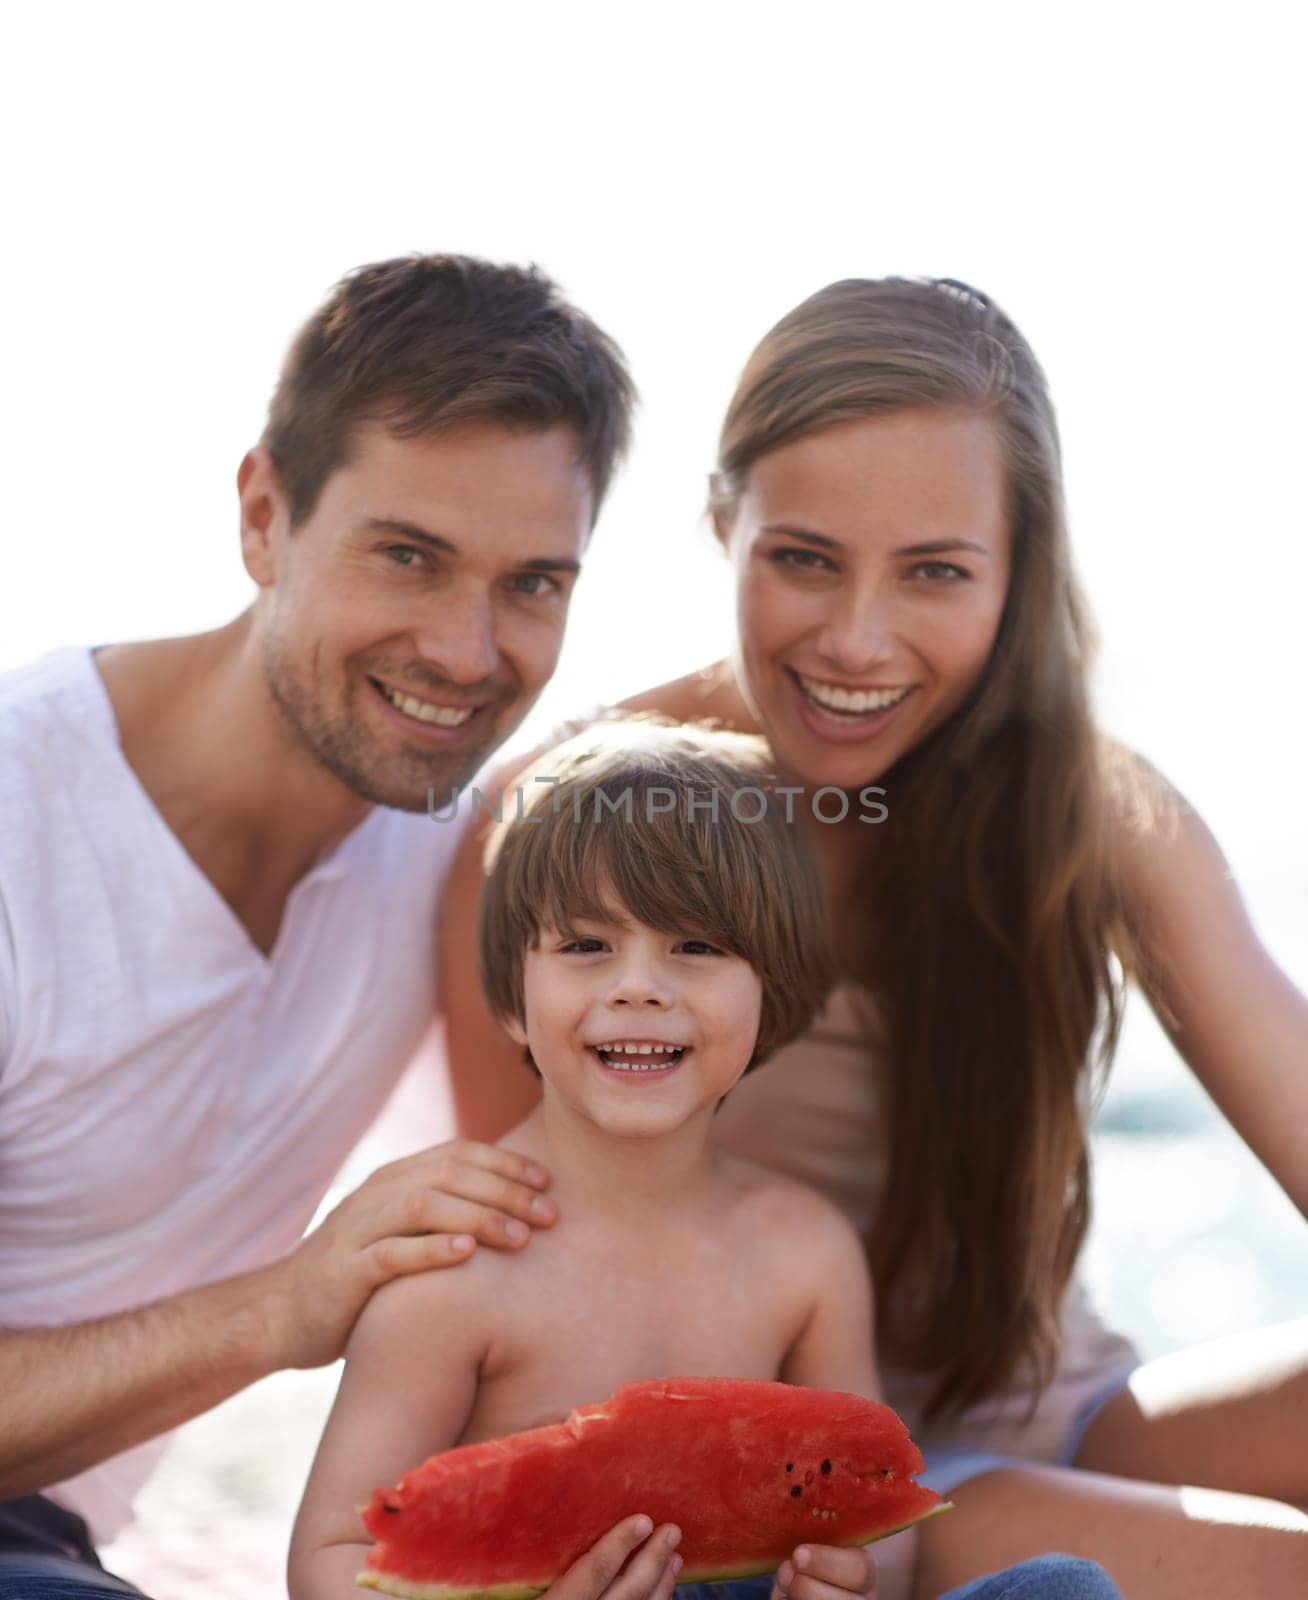 Family, watermelon and summer portrait at beach on travel holiday with a smile and fun. Man, woman and kid eating fruit and together on vacation at sea with love, care and happiness outdoor in nature.